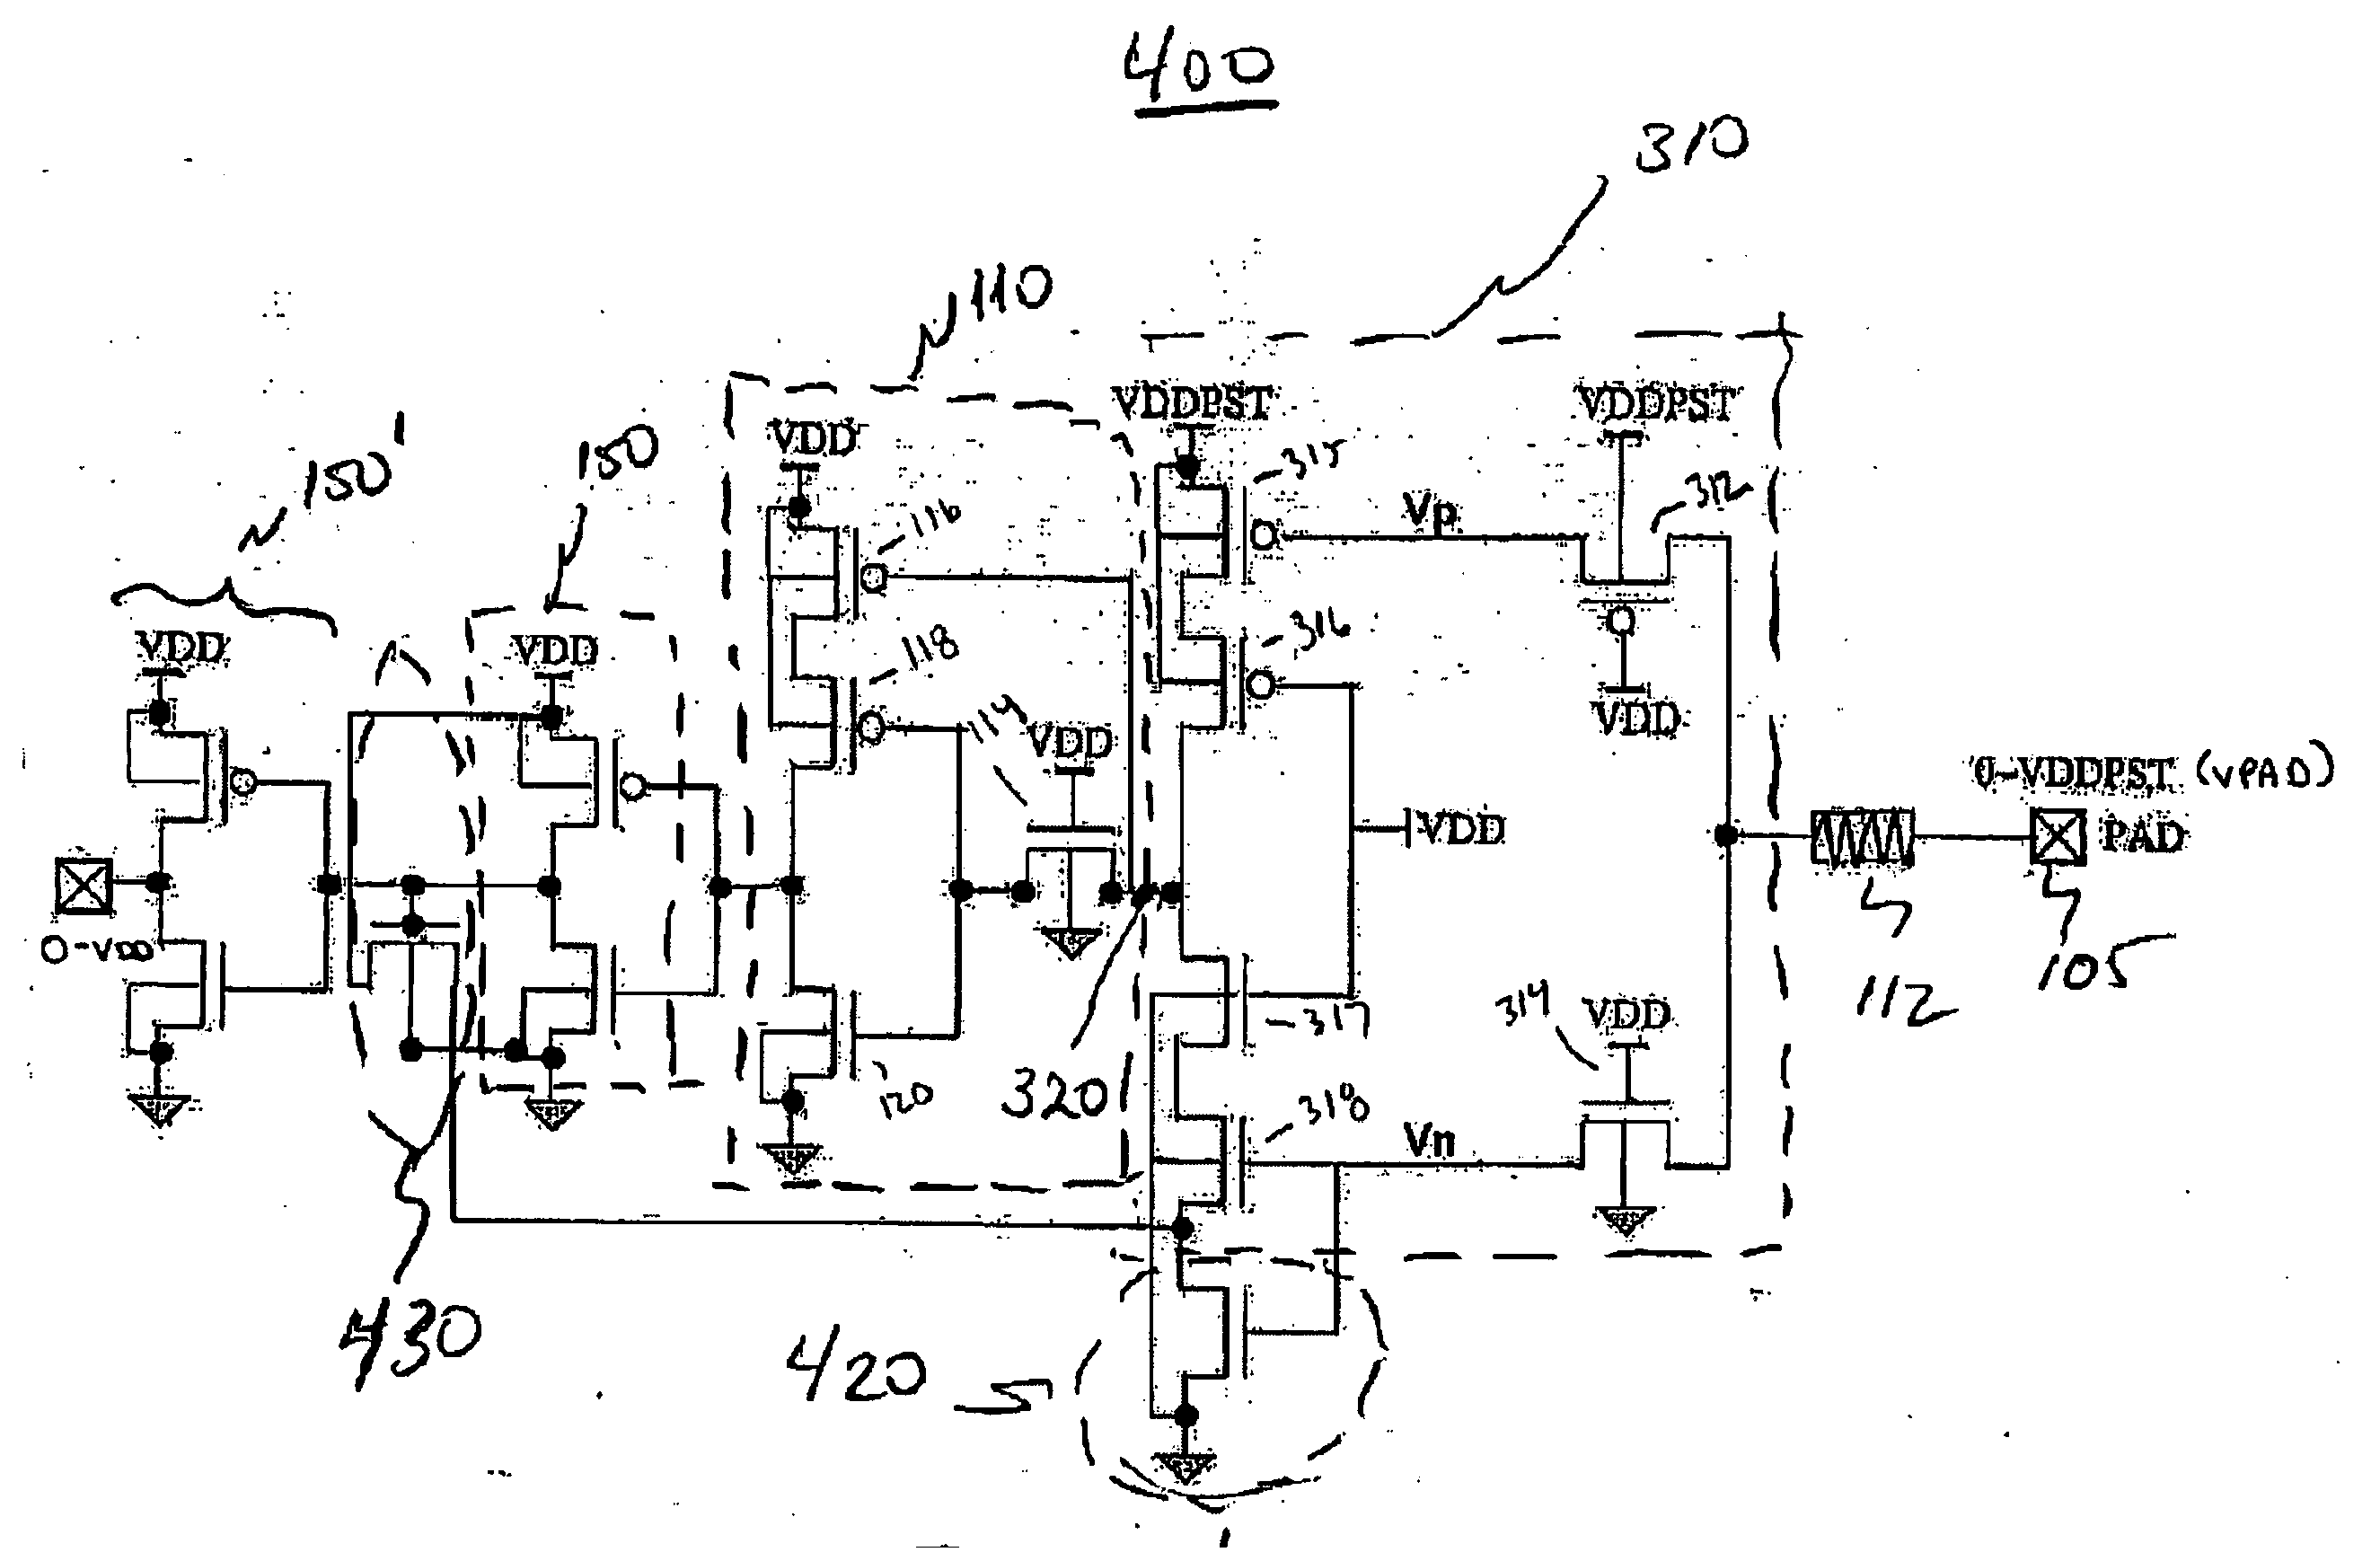 Input buffer structure with single gate oxide